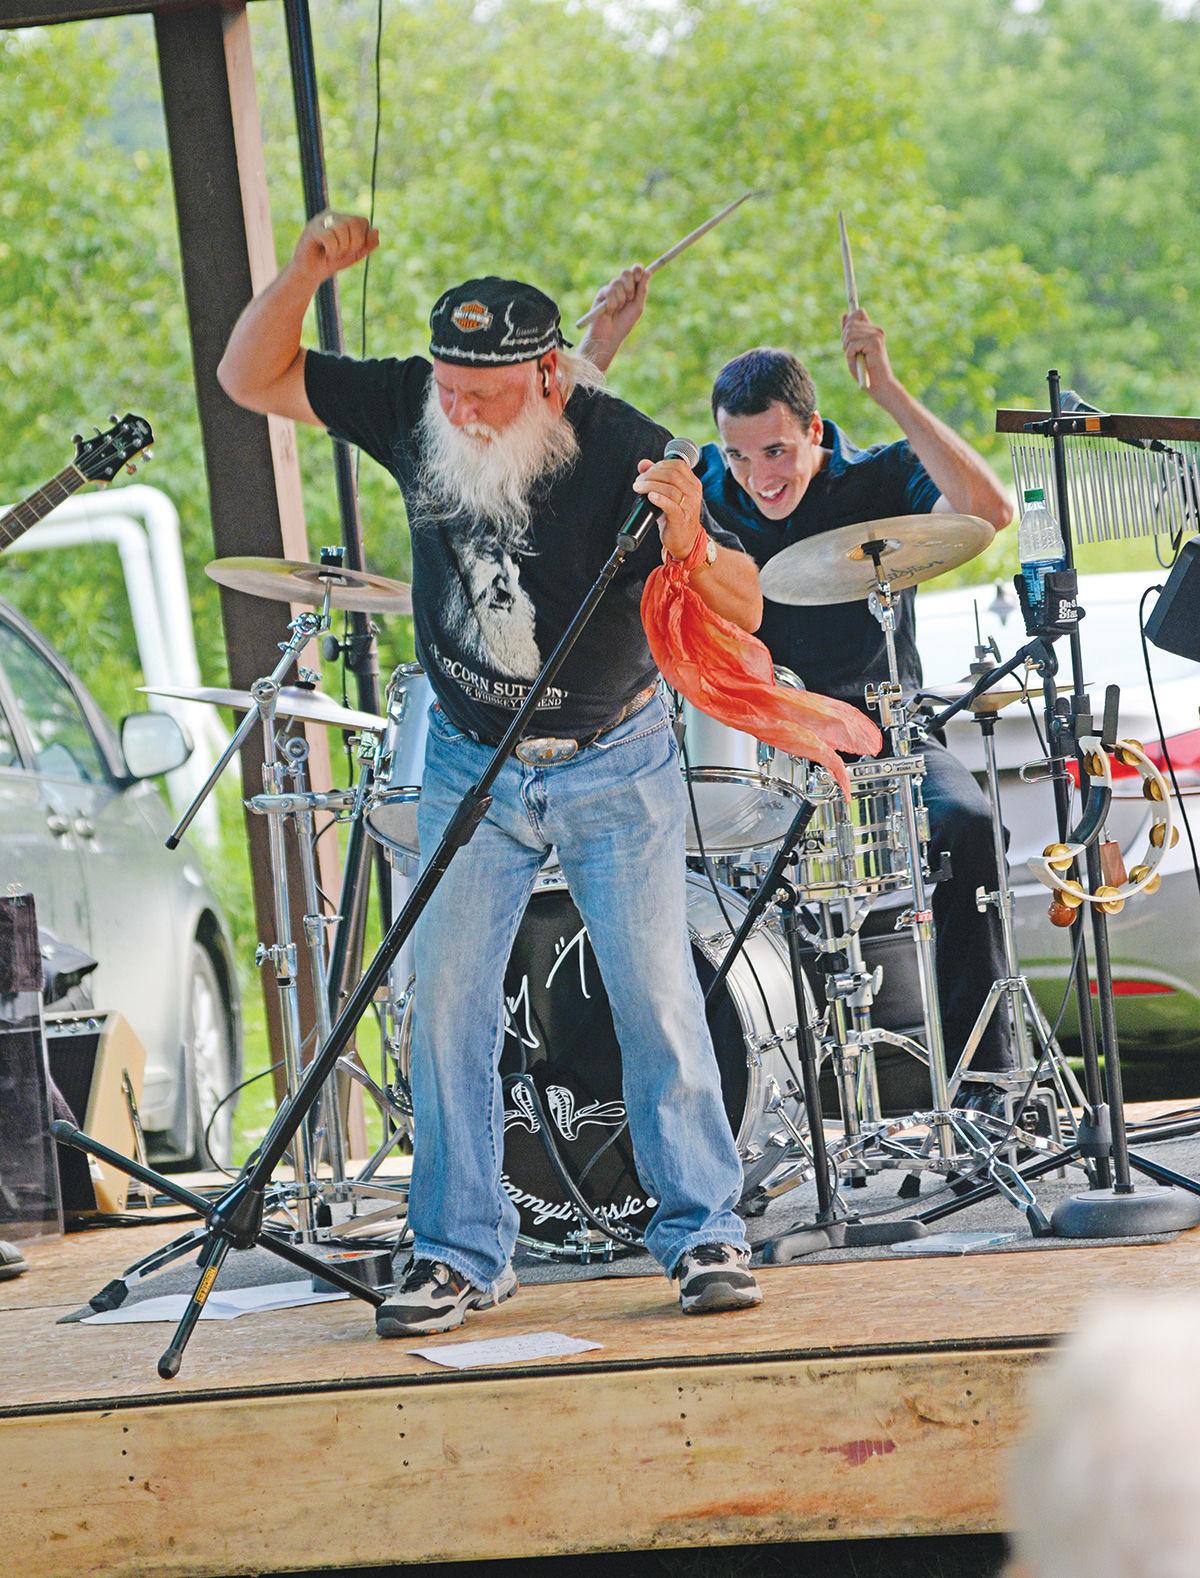 Jimmy T S Legacy Will Be Encouraging Young Musicians Local News Vtcng Com